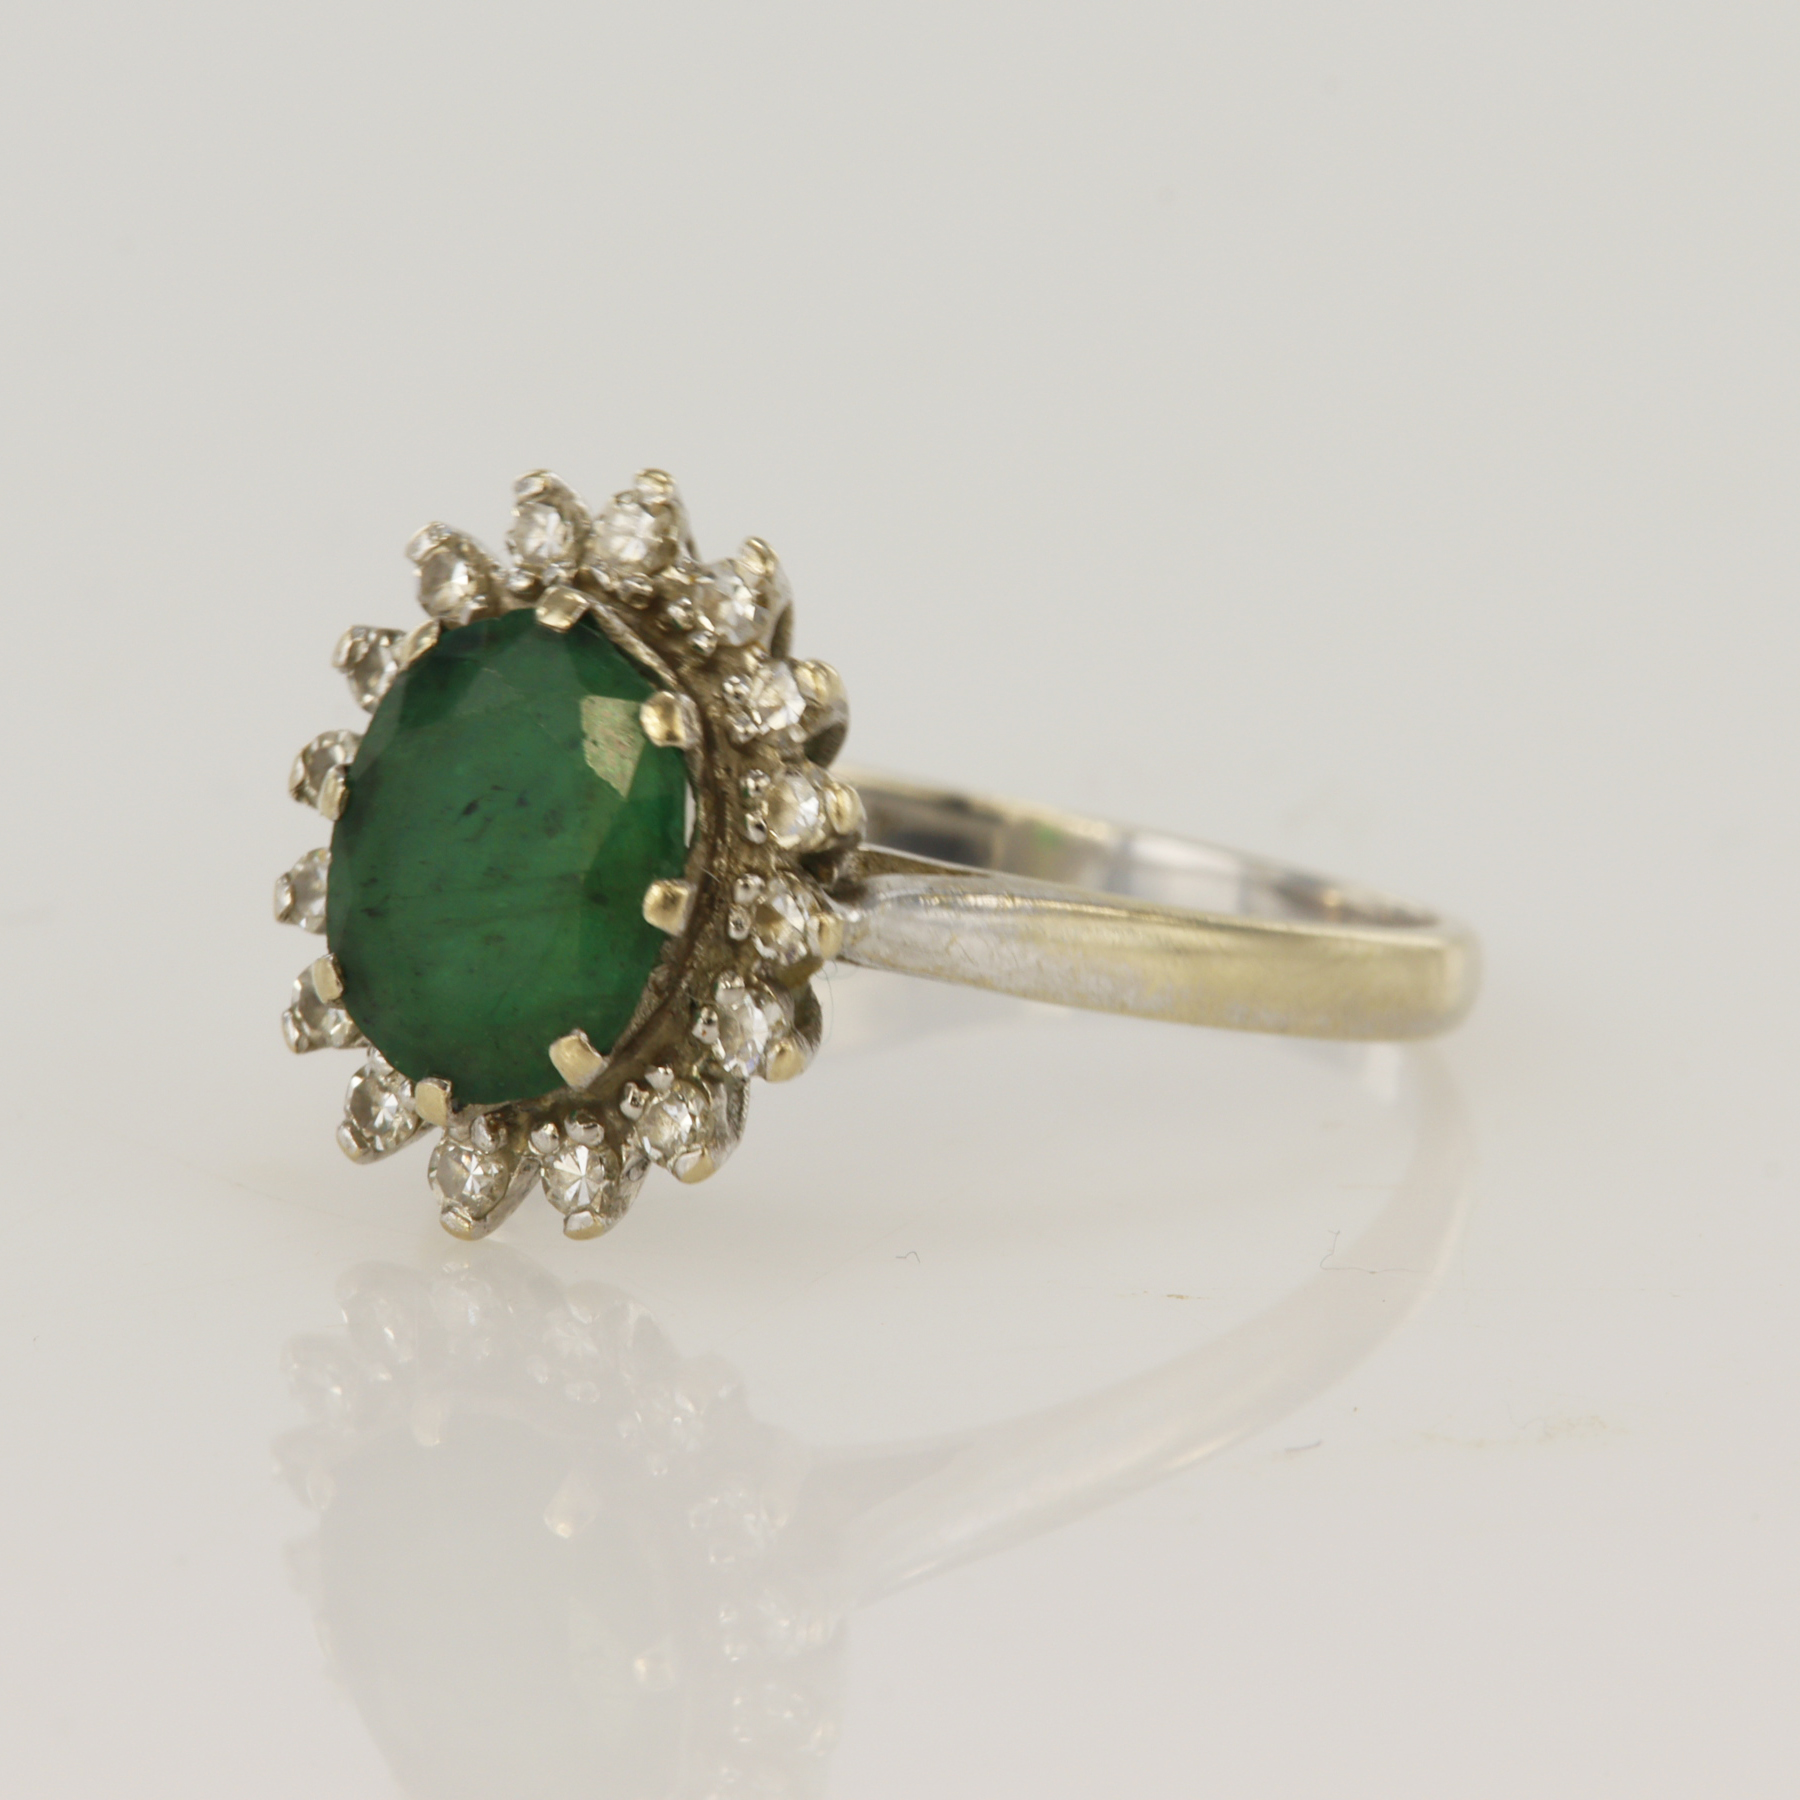 White gold (tests 18ct) diamond and emerald cluster ring, one oval emerald measuring 8x7mm,